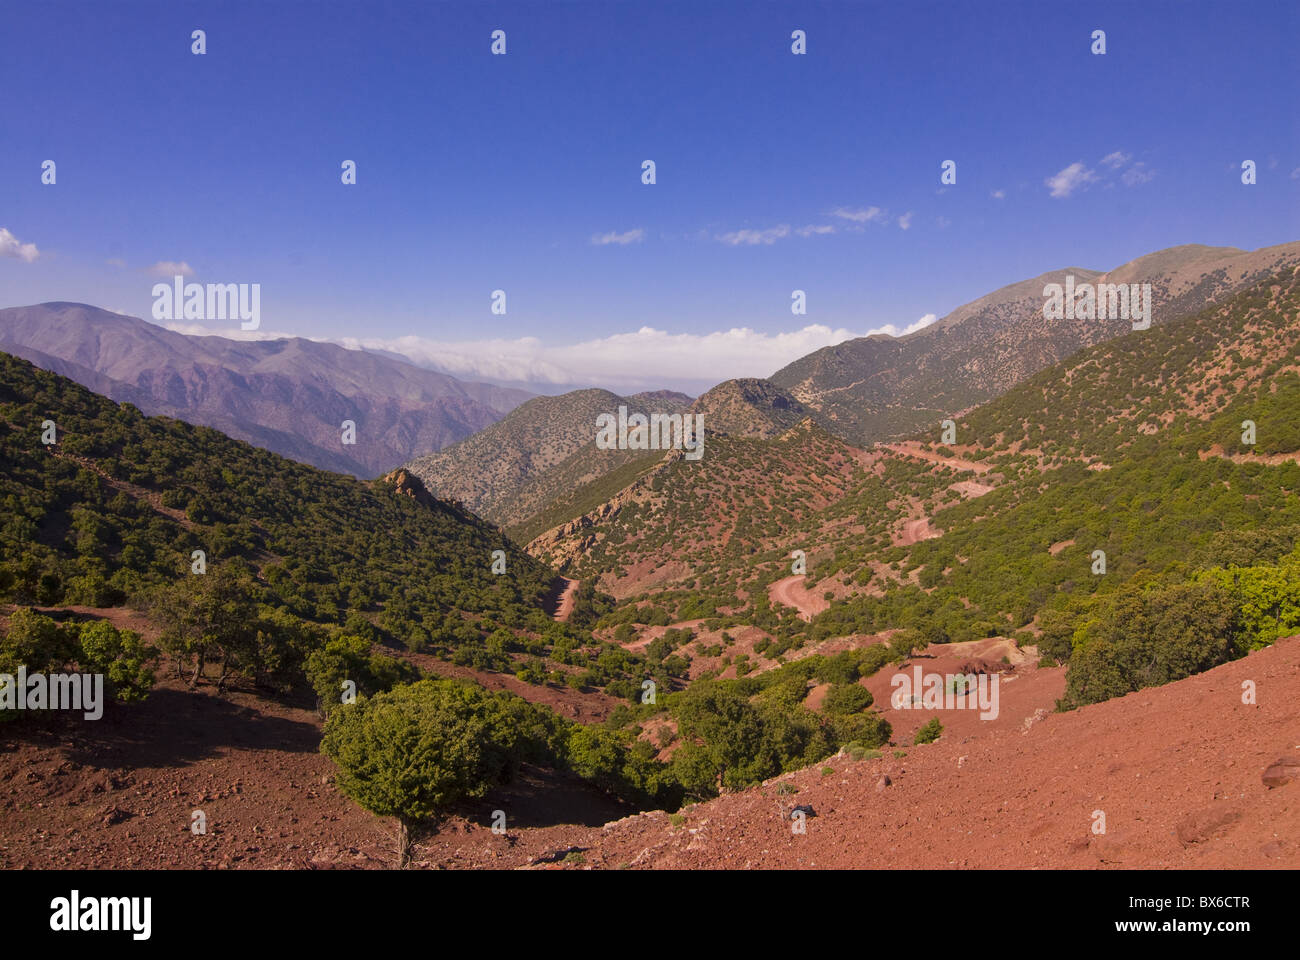 Mountain scenery, seen from the mountain pass Tizi n'Test, Atlas Mountains, Morocco, North Africa, Africa Stock Photo